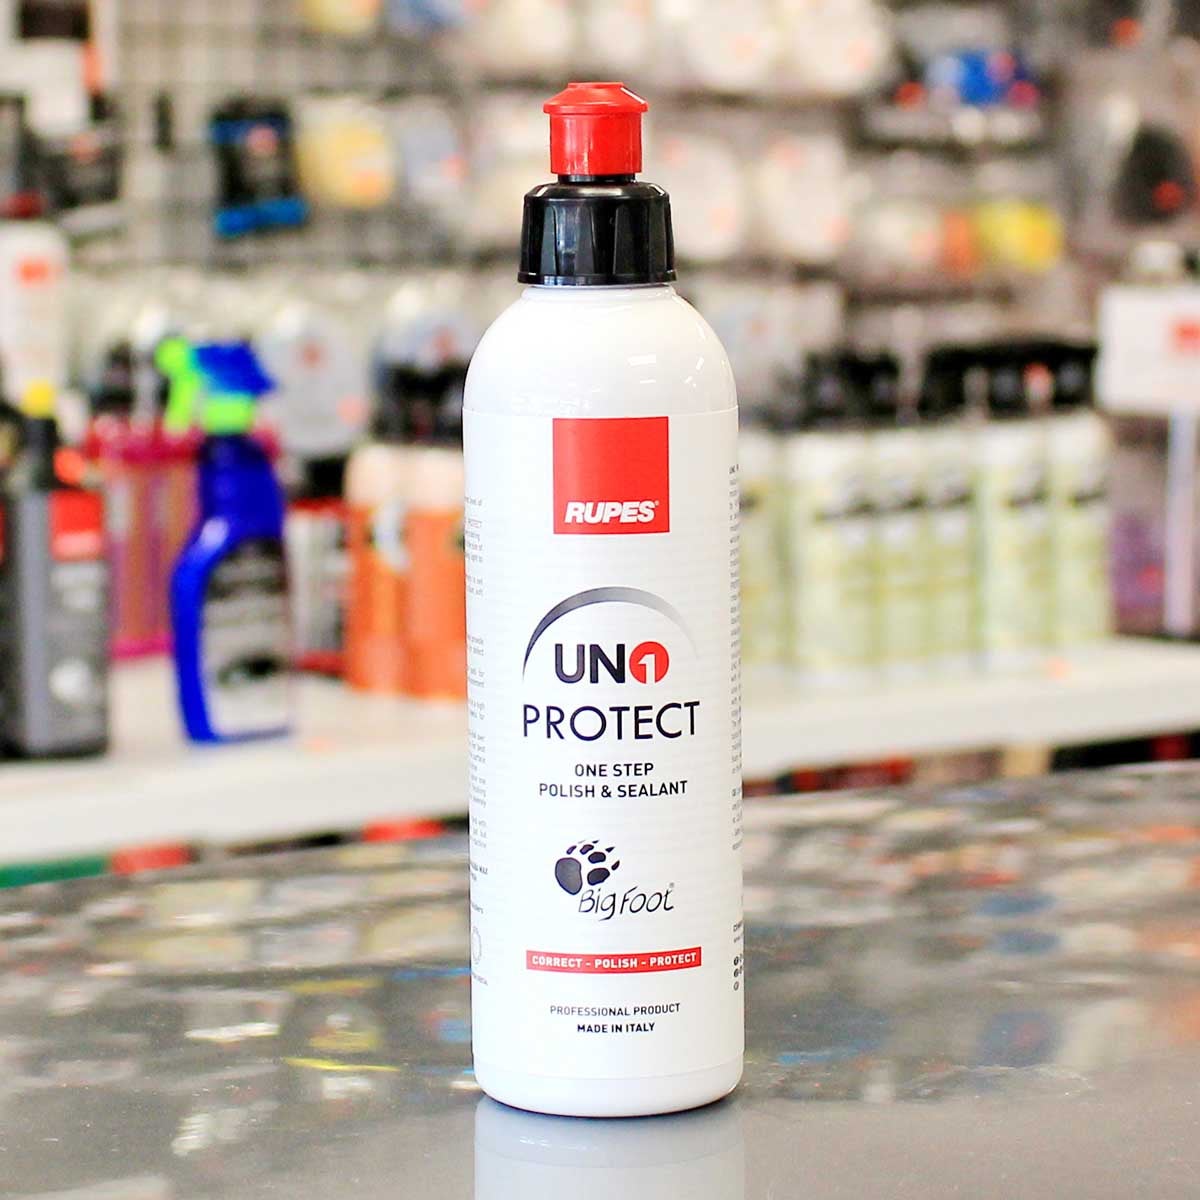 Rupes UNO PROTECT One step Polish and sealant compound – Pal Automotive  Specialties, Inc.